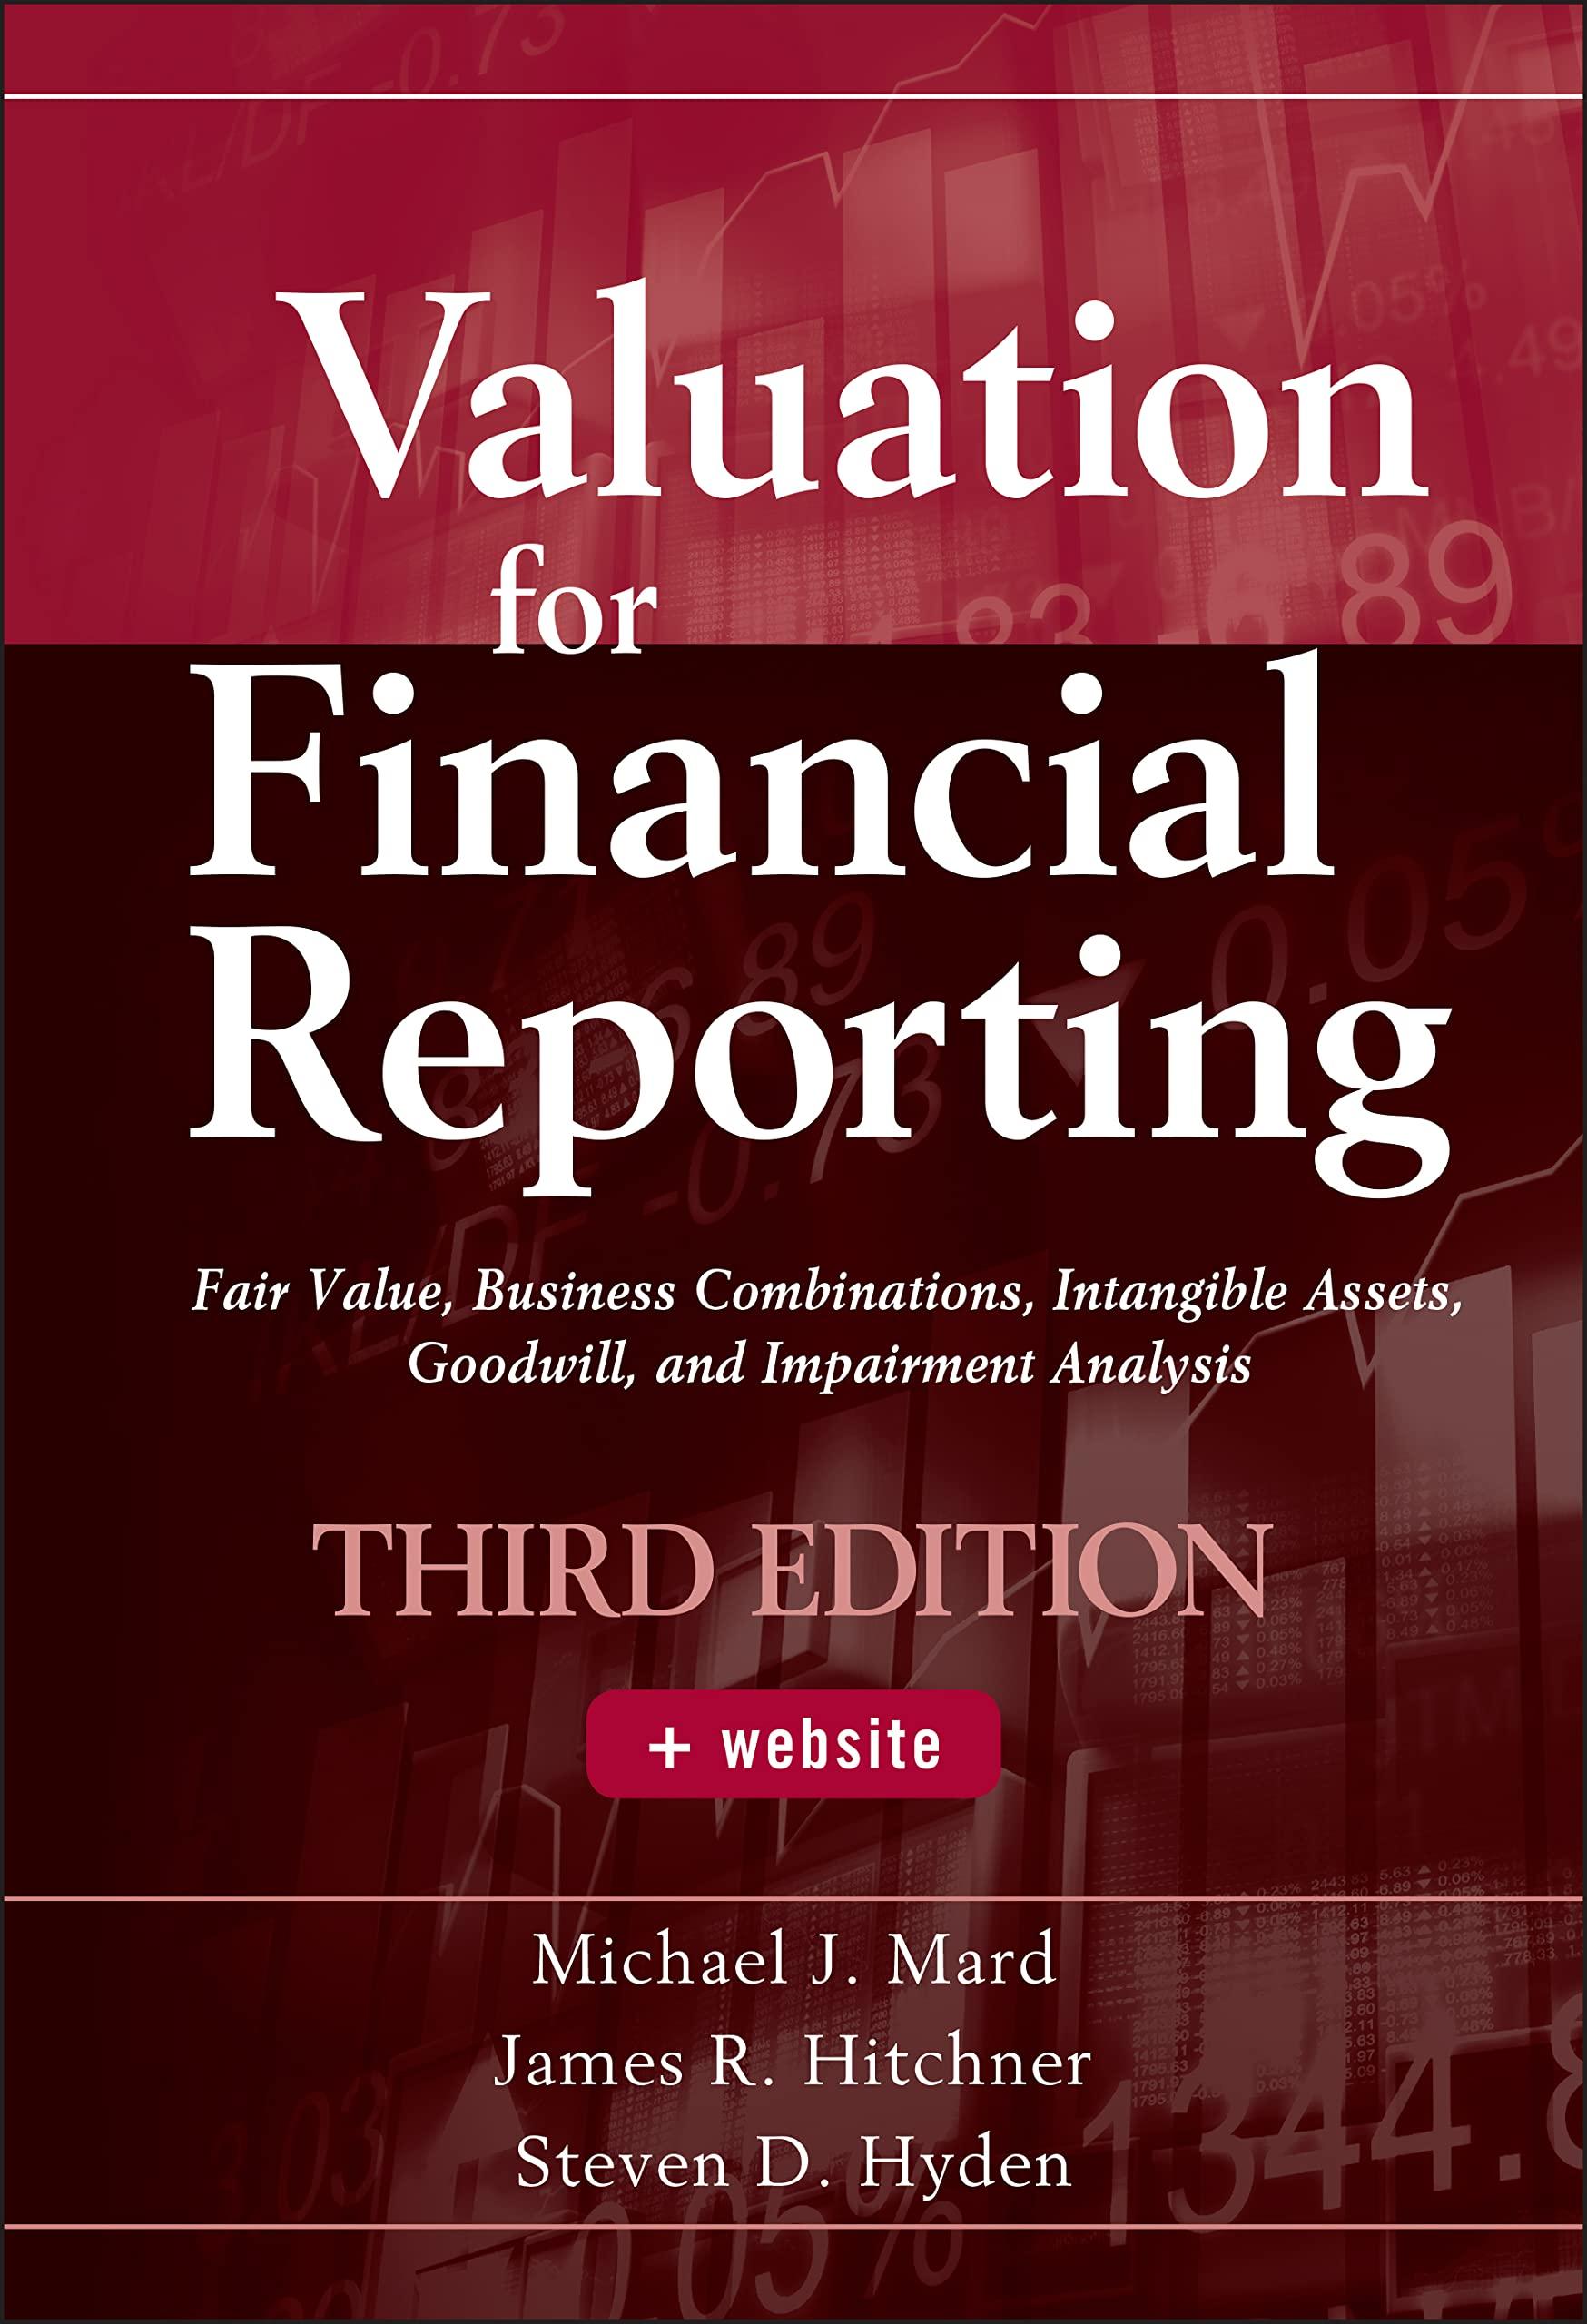 valuation for financial reporting fair value business combinations intangible assets goodwill and impairment